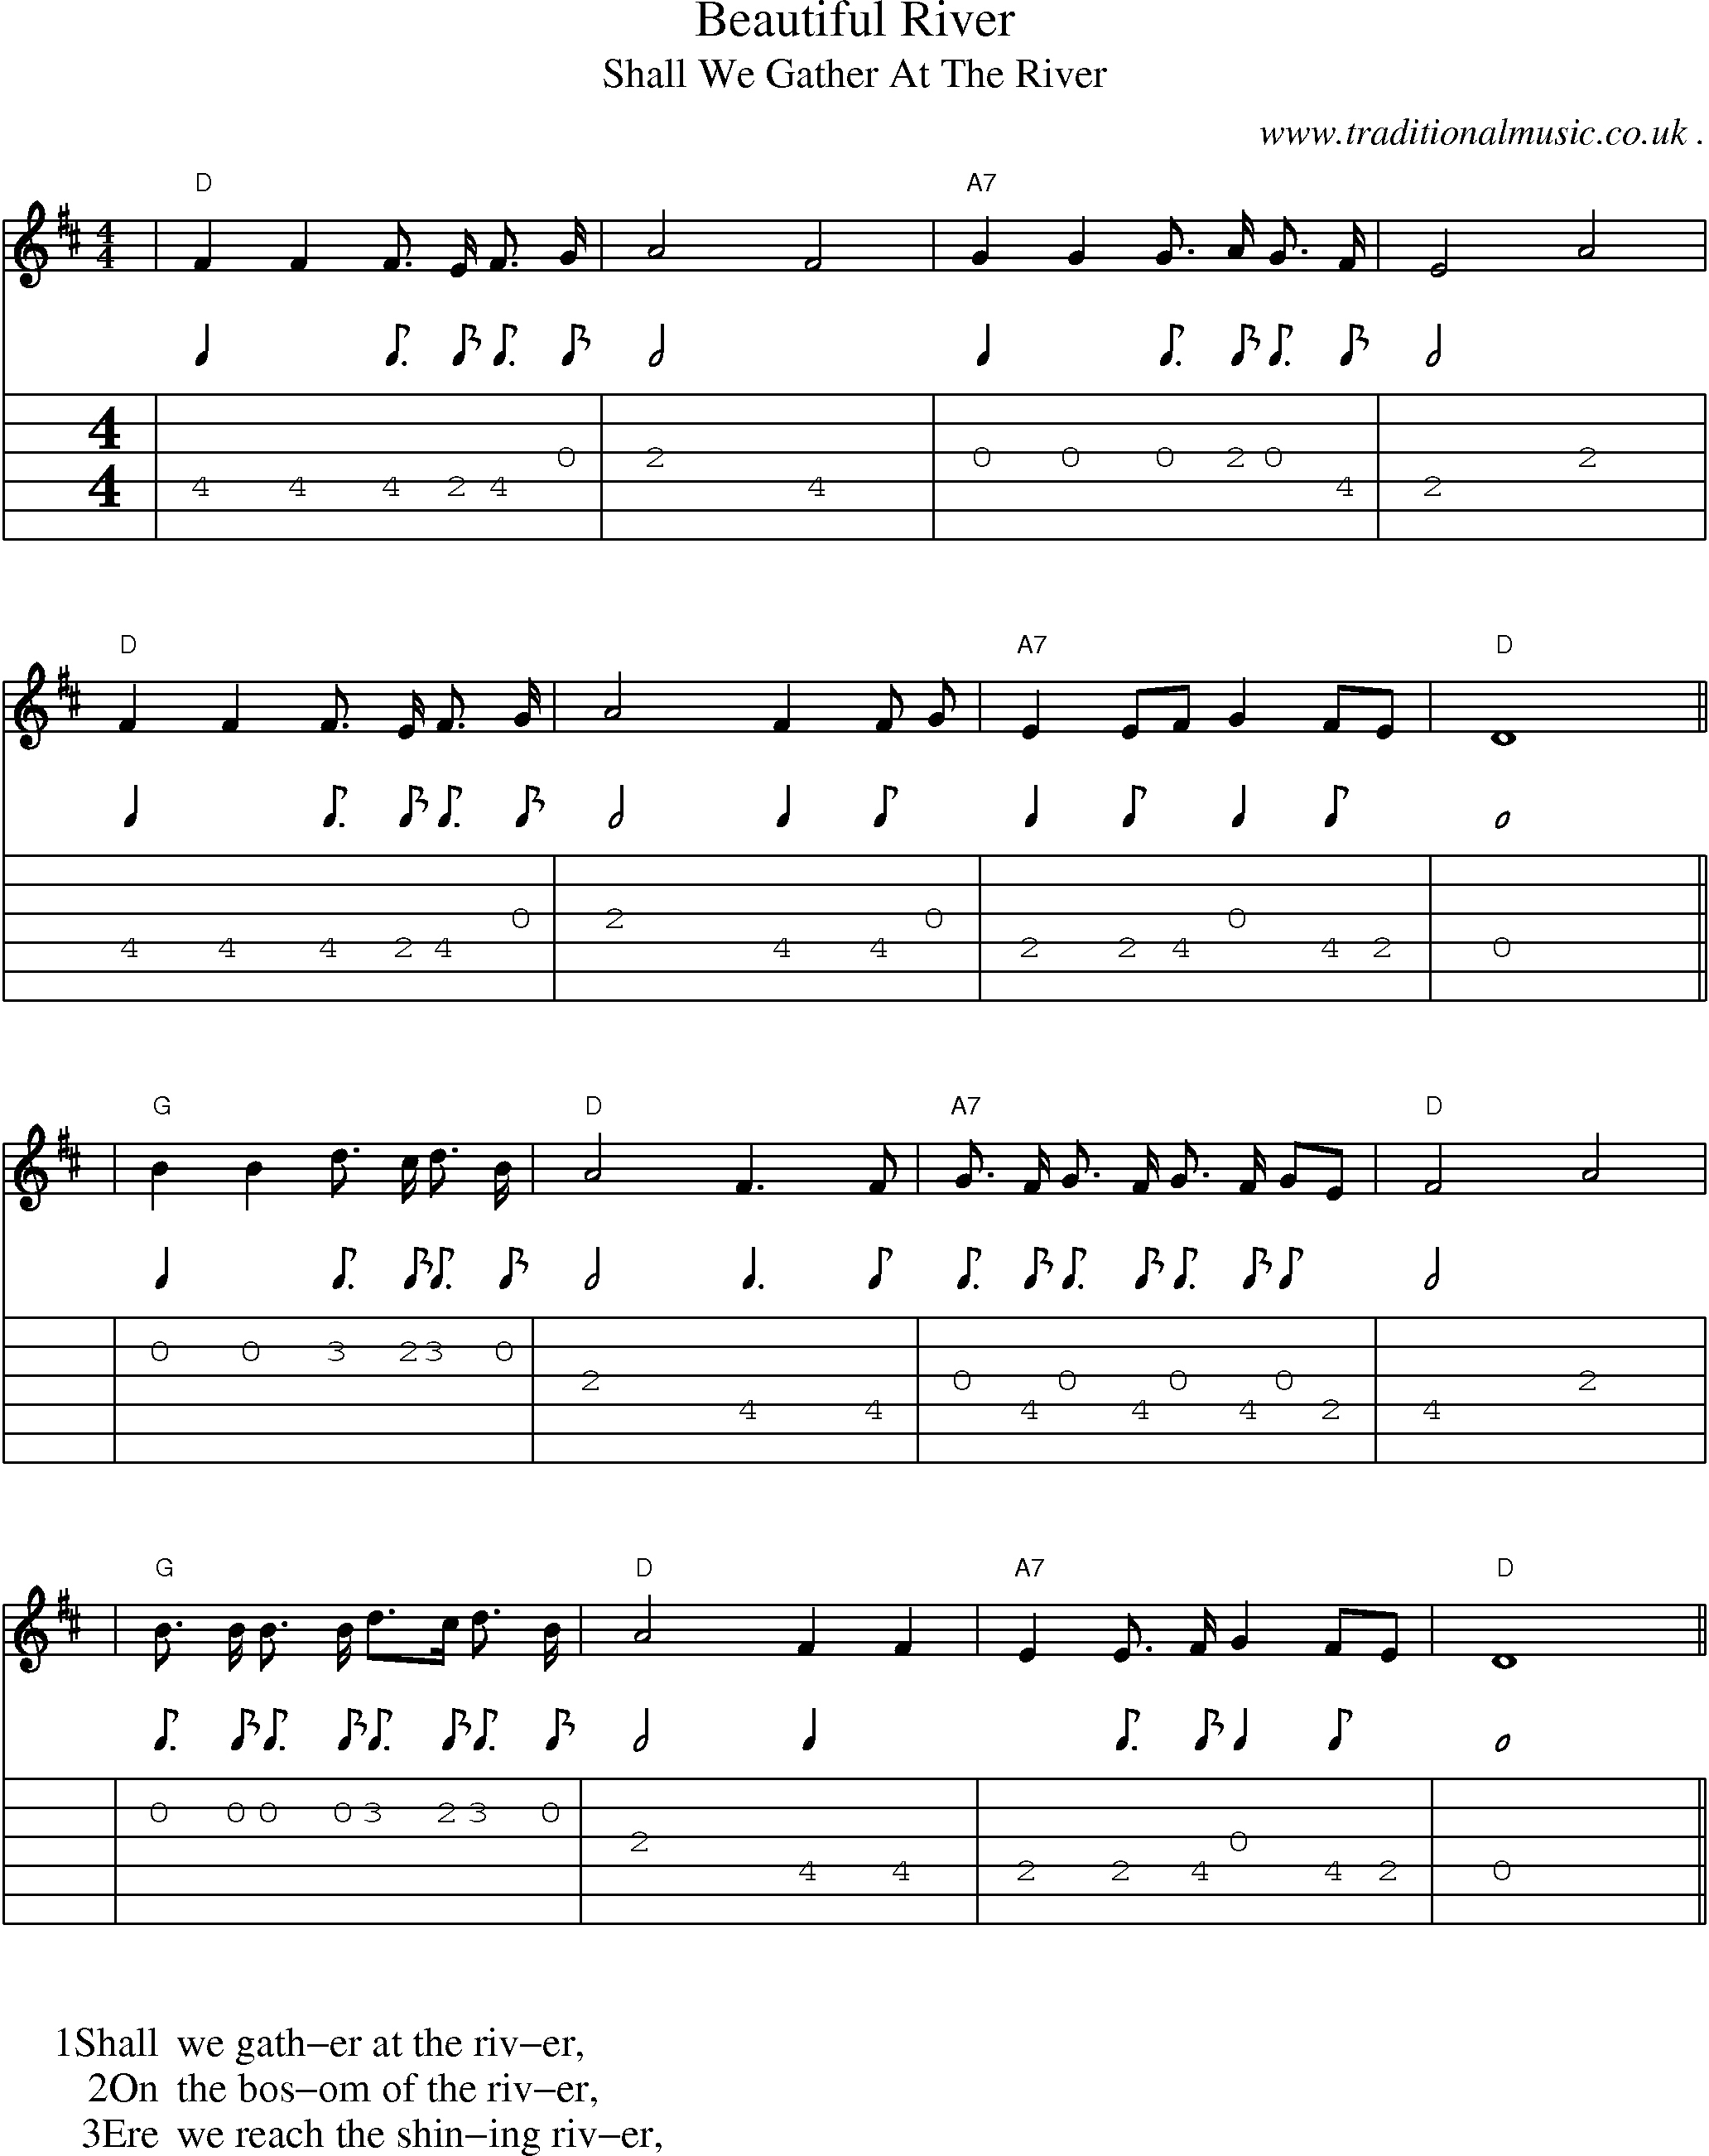 Music Score and Guitar Tabs for Beautiful River